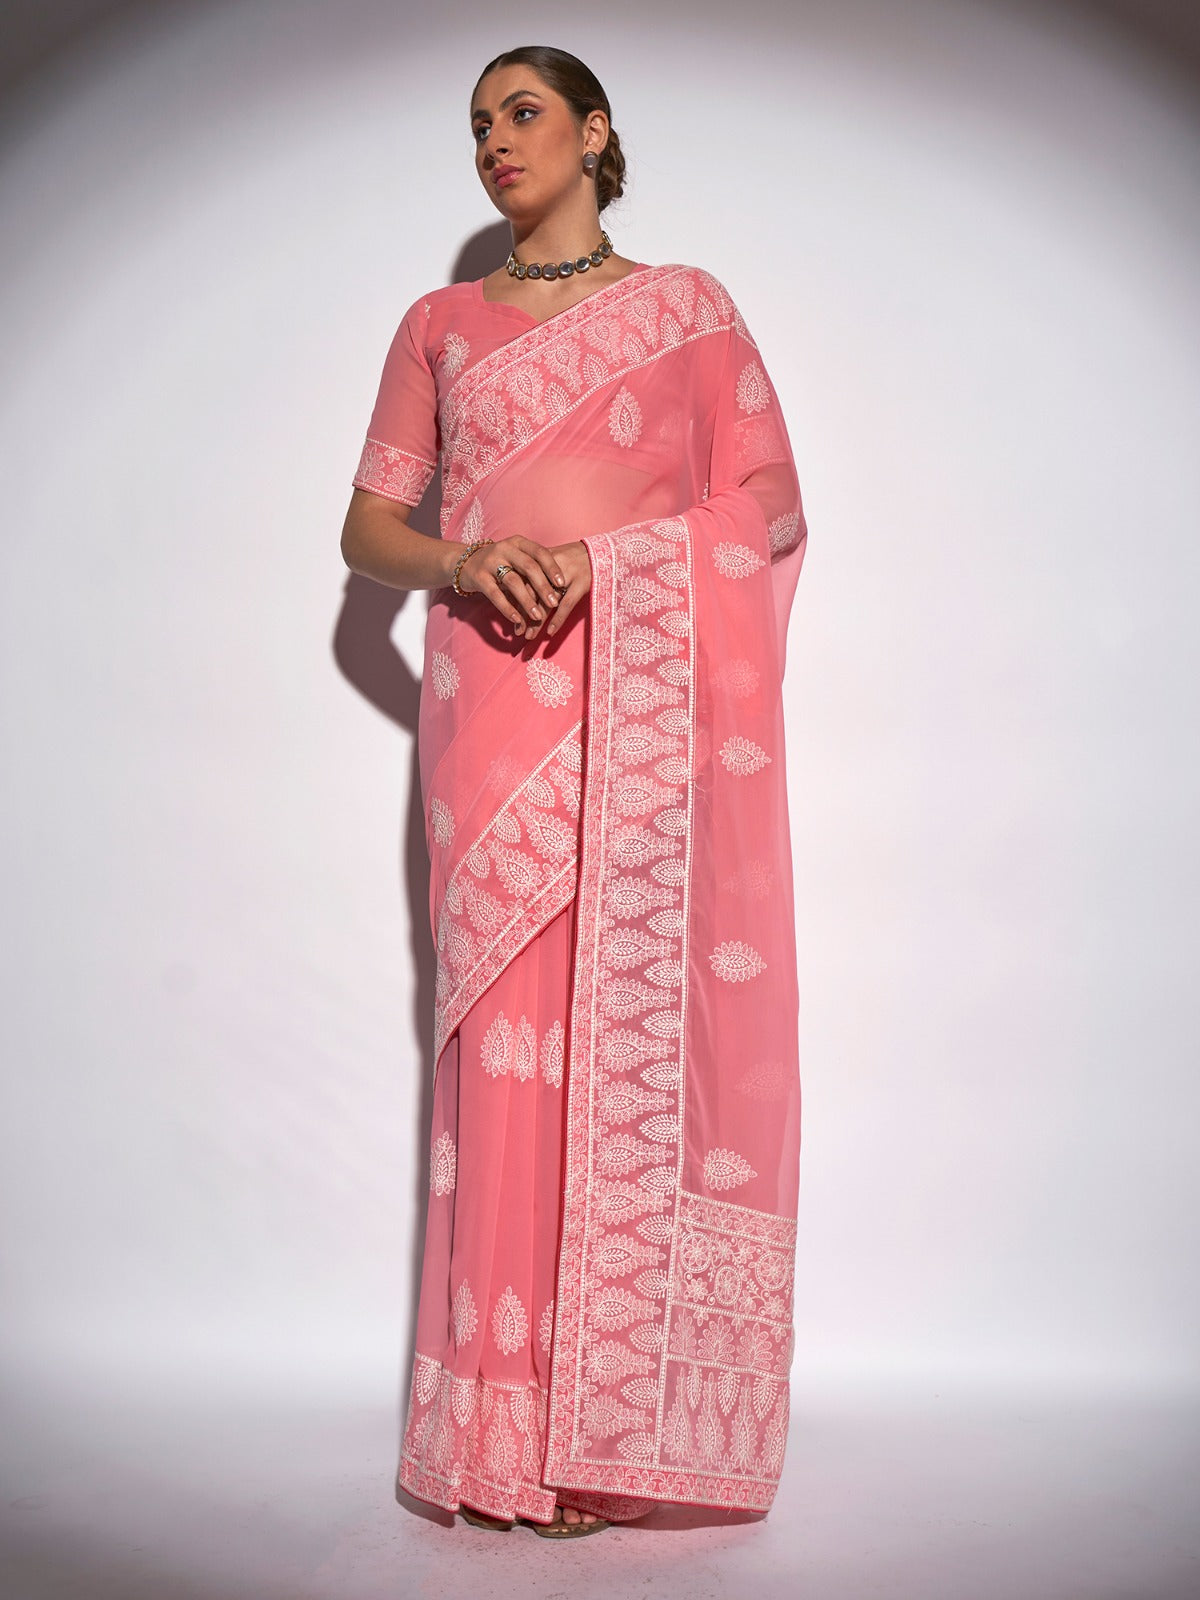 Women's Embroidery Worked Designer Saree Collection - Dwija Fashion